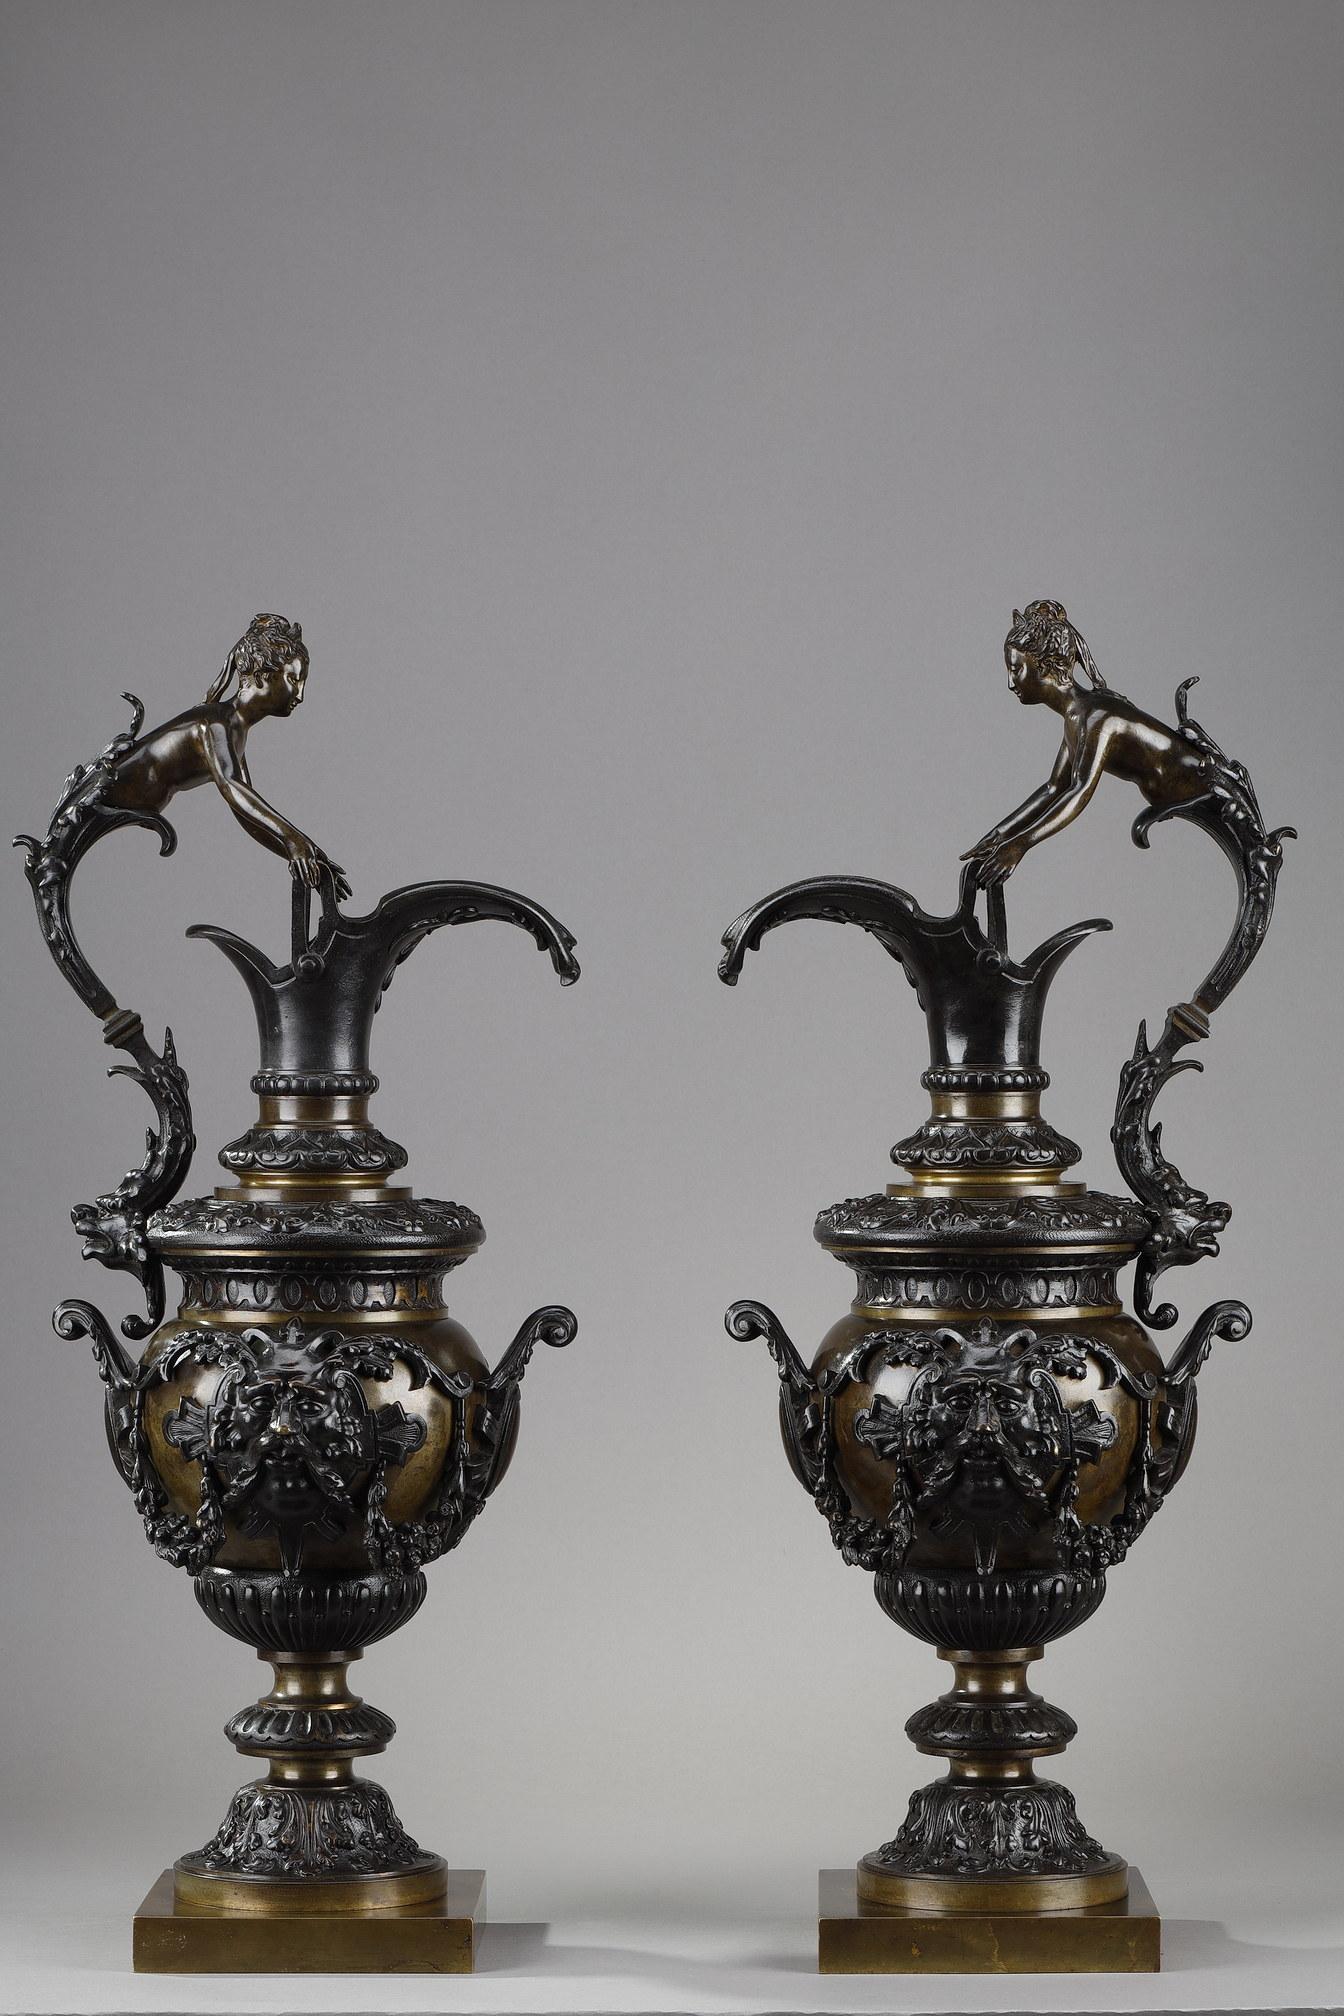 Pair of decorative ewers in bronze with two patinas in the Renaissance taste. The handles are in the form of busts of nude women wearing diadems emerging from acanthus leaves and ending with a lion's head. The body is decorated with masks,